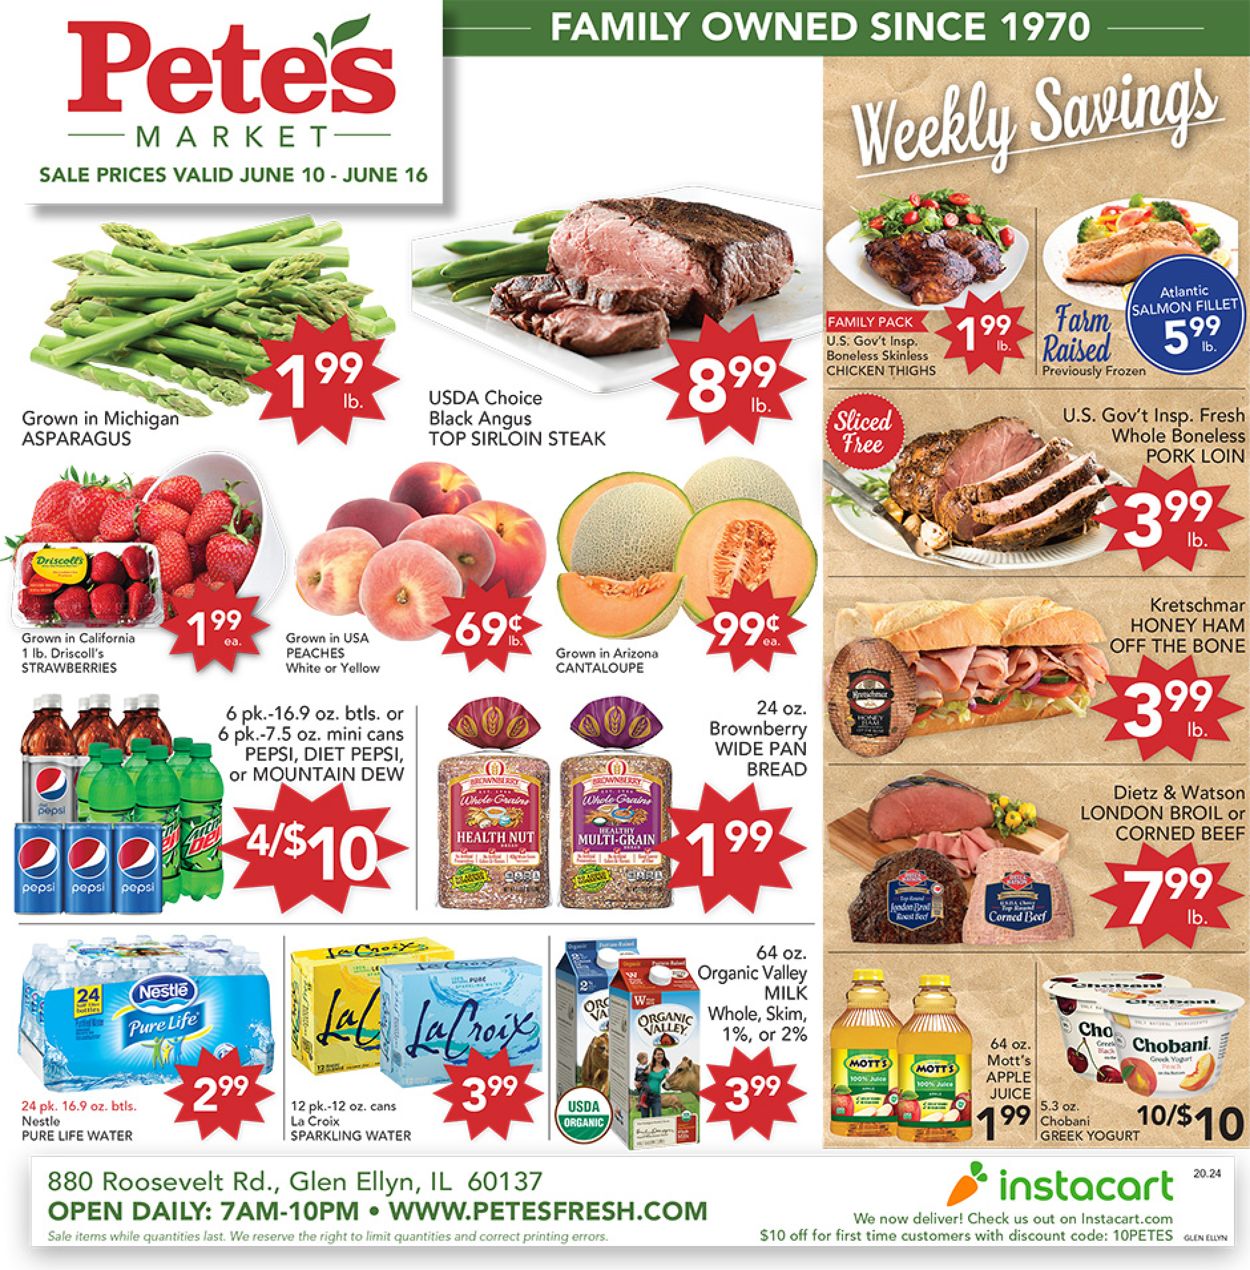 Pete's Fresh Market Current weekly ad 06/10 - 06/16/2020.